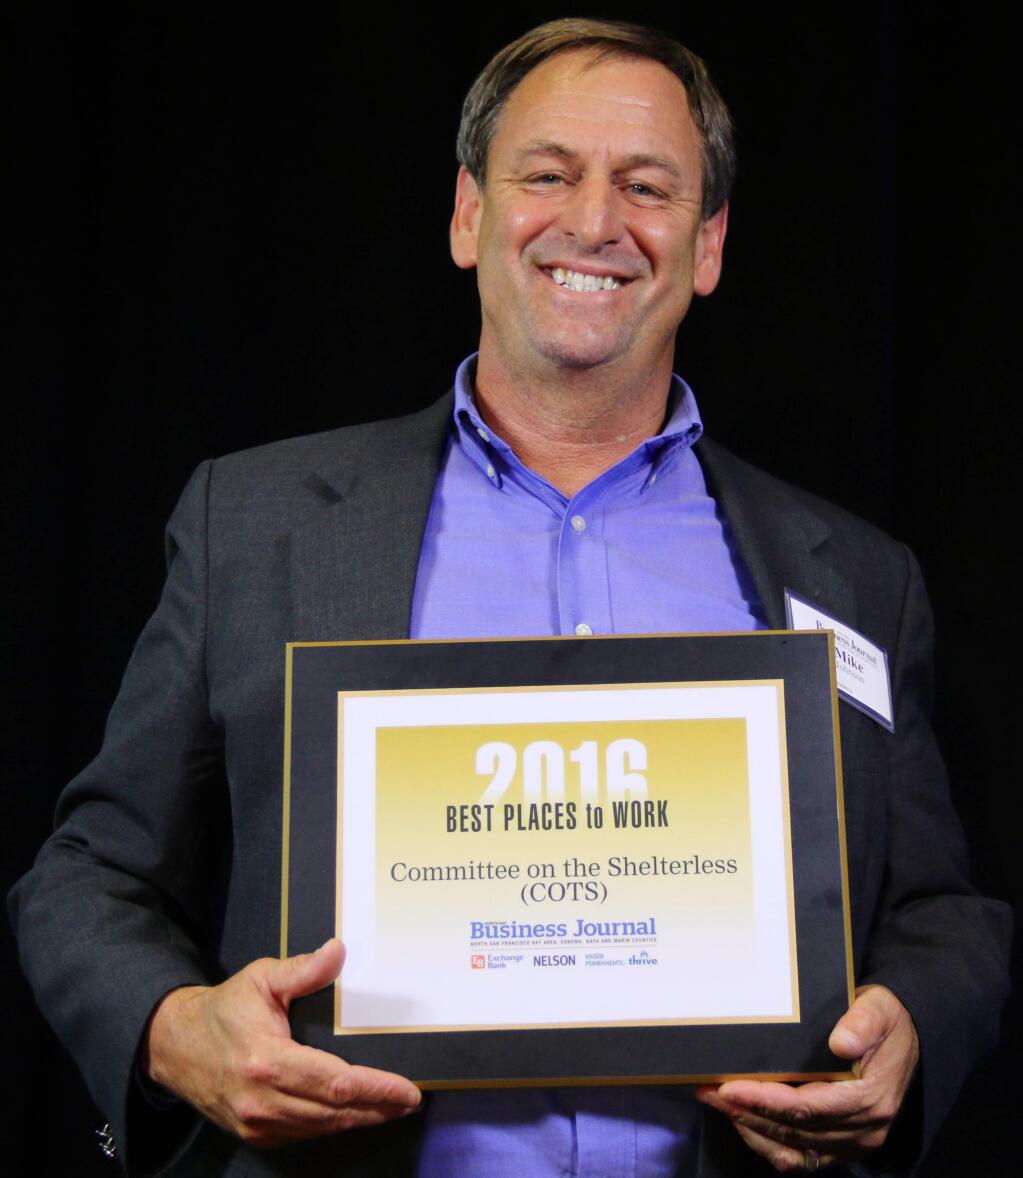 Mike Johnson of Committee on the Shelterless (COTS) accepts one of North Bay Business Journal's Best Places to Work awards at Hyatt Vineyard Creek Hotel & Spa on Sept. 29, 2016. (JEFF QUACKENBUSH / NORTH BAY BUSINESS JOURNAL)